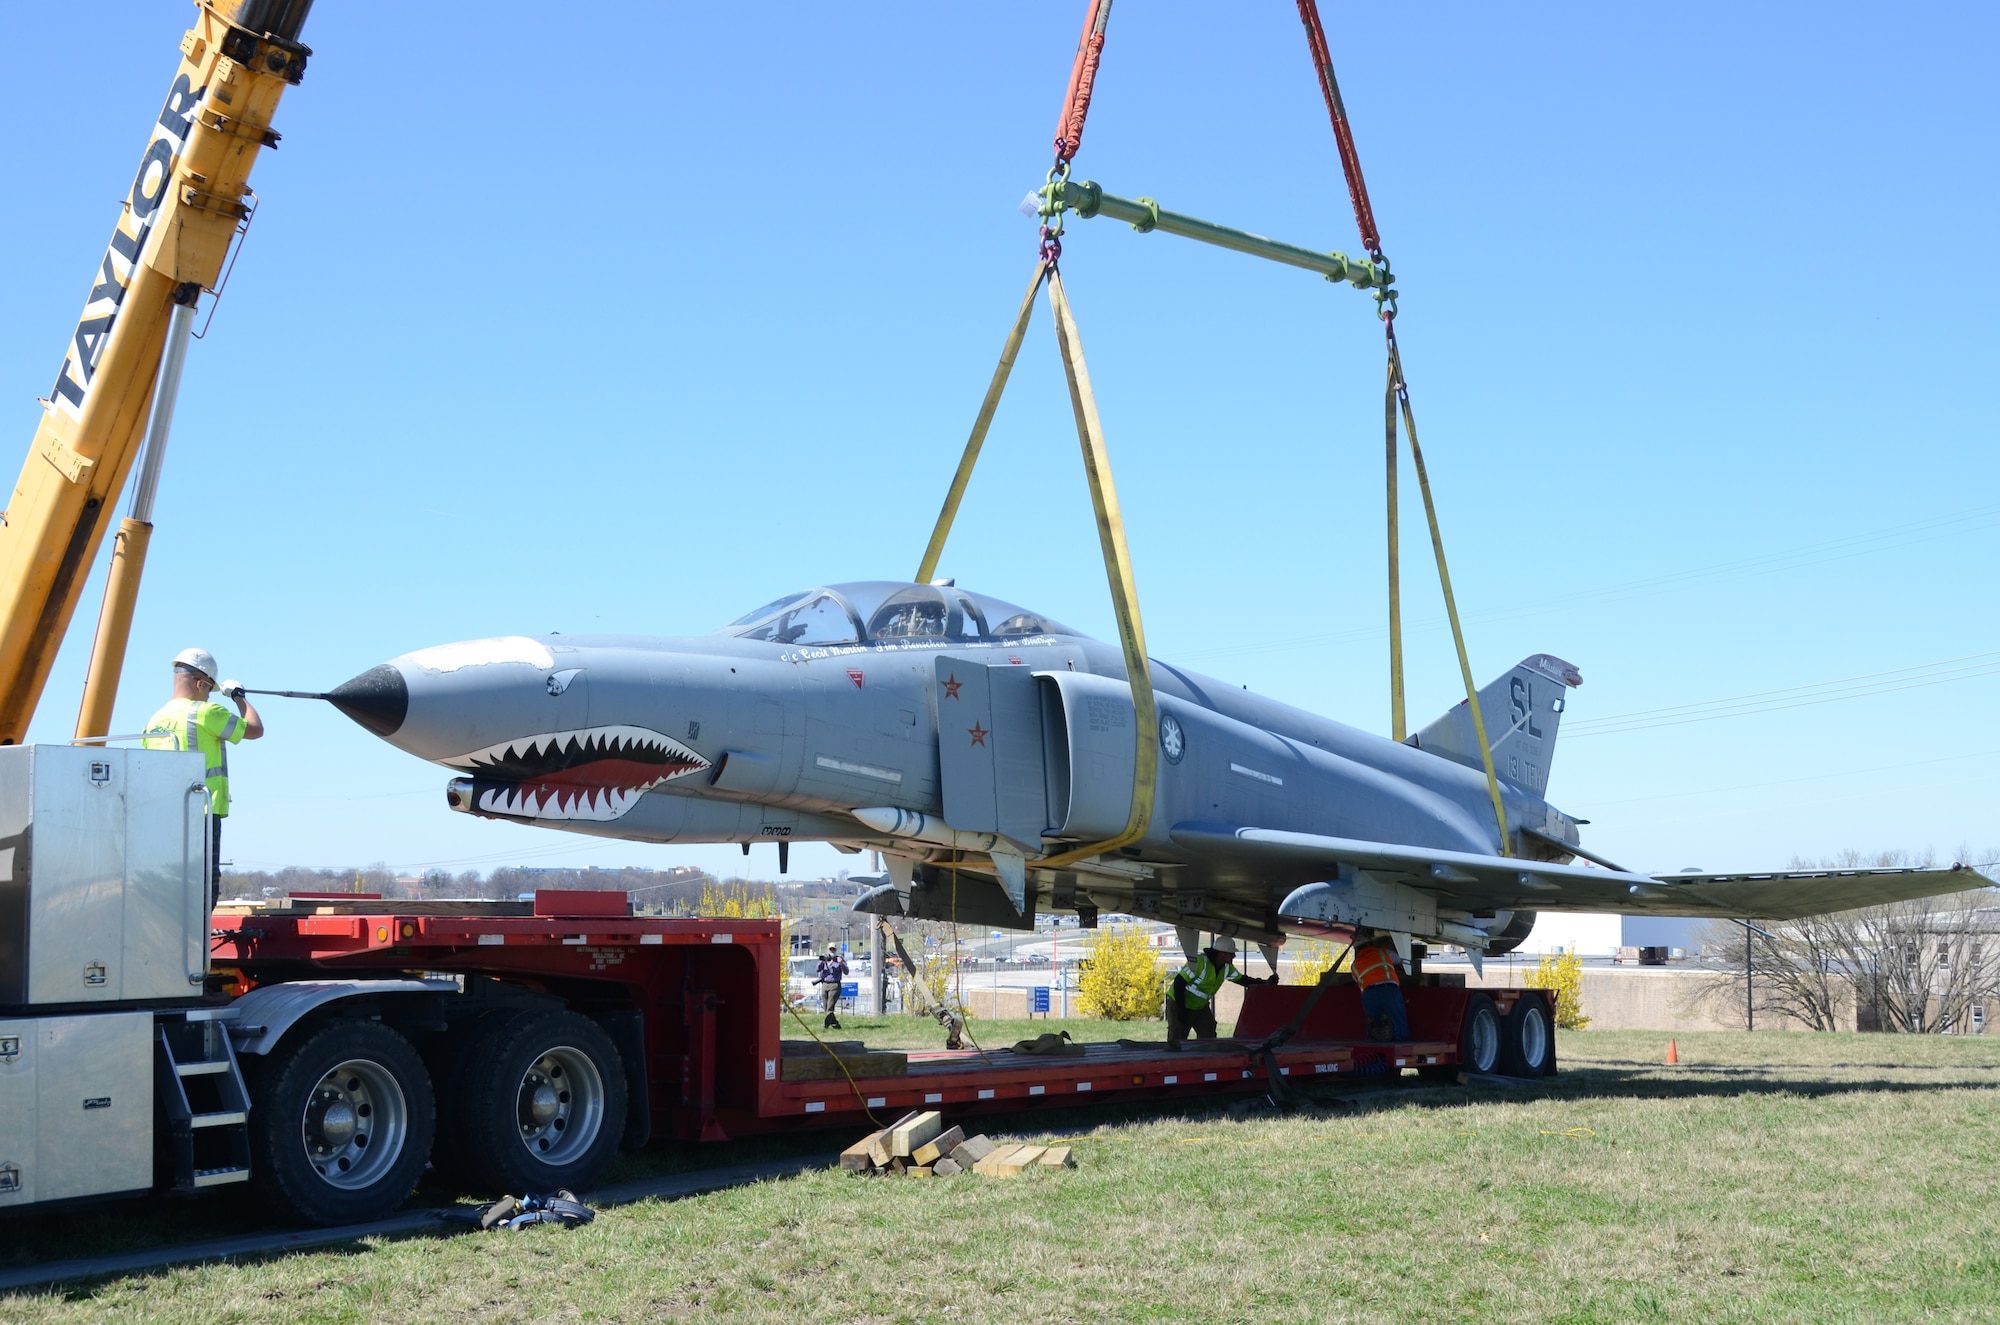 An F-4 Phantom II jet (AF68-338) on static display at the Missouri Air National Guard’s 131st Bomb Wing base at Lambert-St. Louis International Airport, is removed from its pedestal, March 31, 2015. A total of three static display aircraft, including an F-15A Eagle and an F-100 Super Sabre, will be transported to a new home at the planned 131st Bomb Wing Heritage Park at Whiteman Air Force Base, Mo. (U.S. Air National Guard photo by Senior Master Sgt. Mary-Dale Amison)